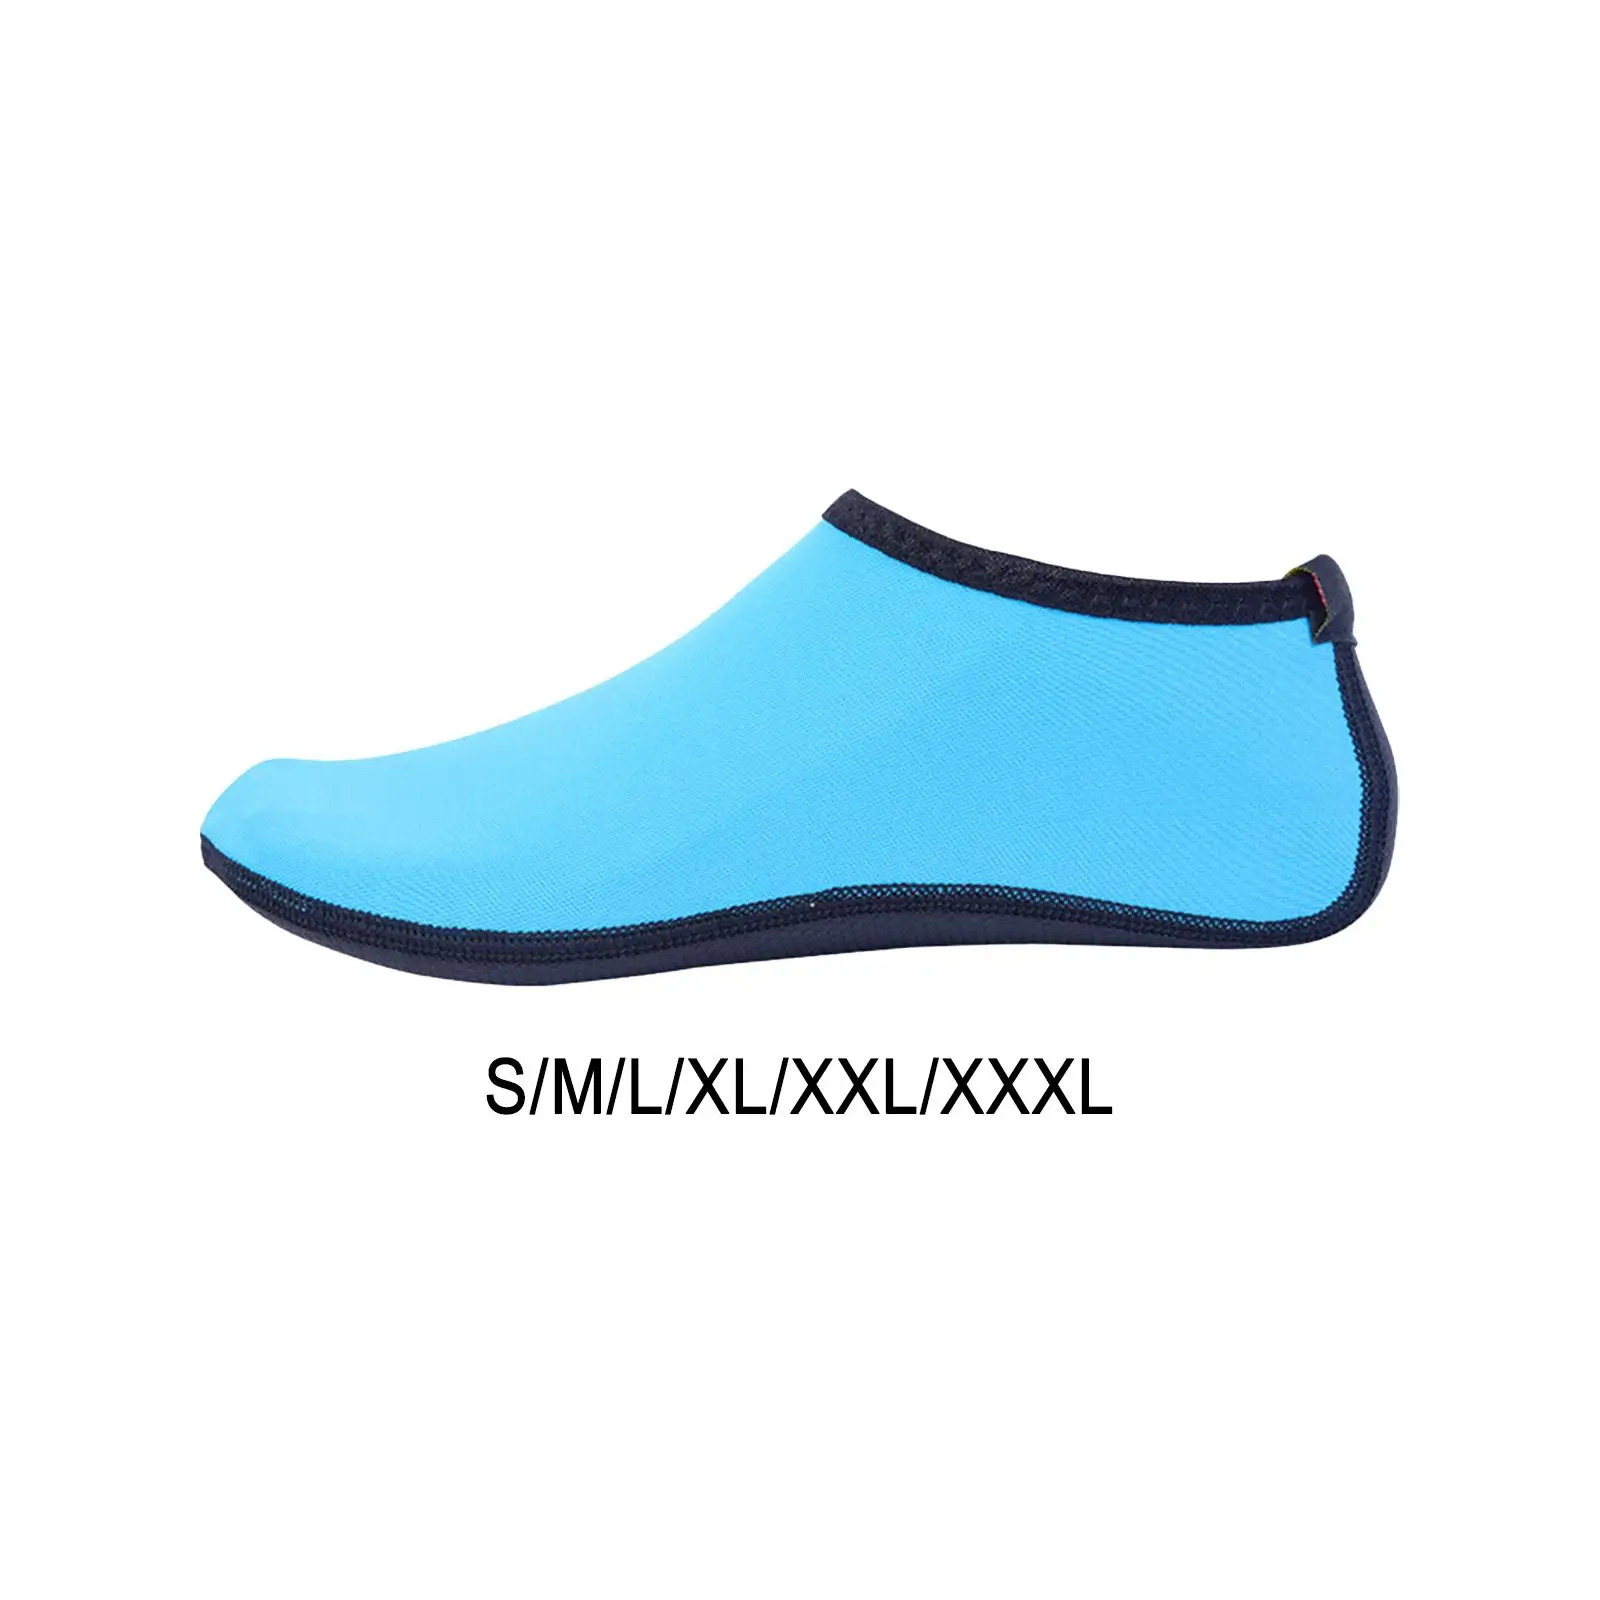 Dive Socks Swim Water Beach Socks for Snorkeling Surfing Breathable Smooth Neck Design Avoid Chafing